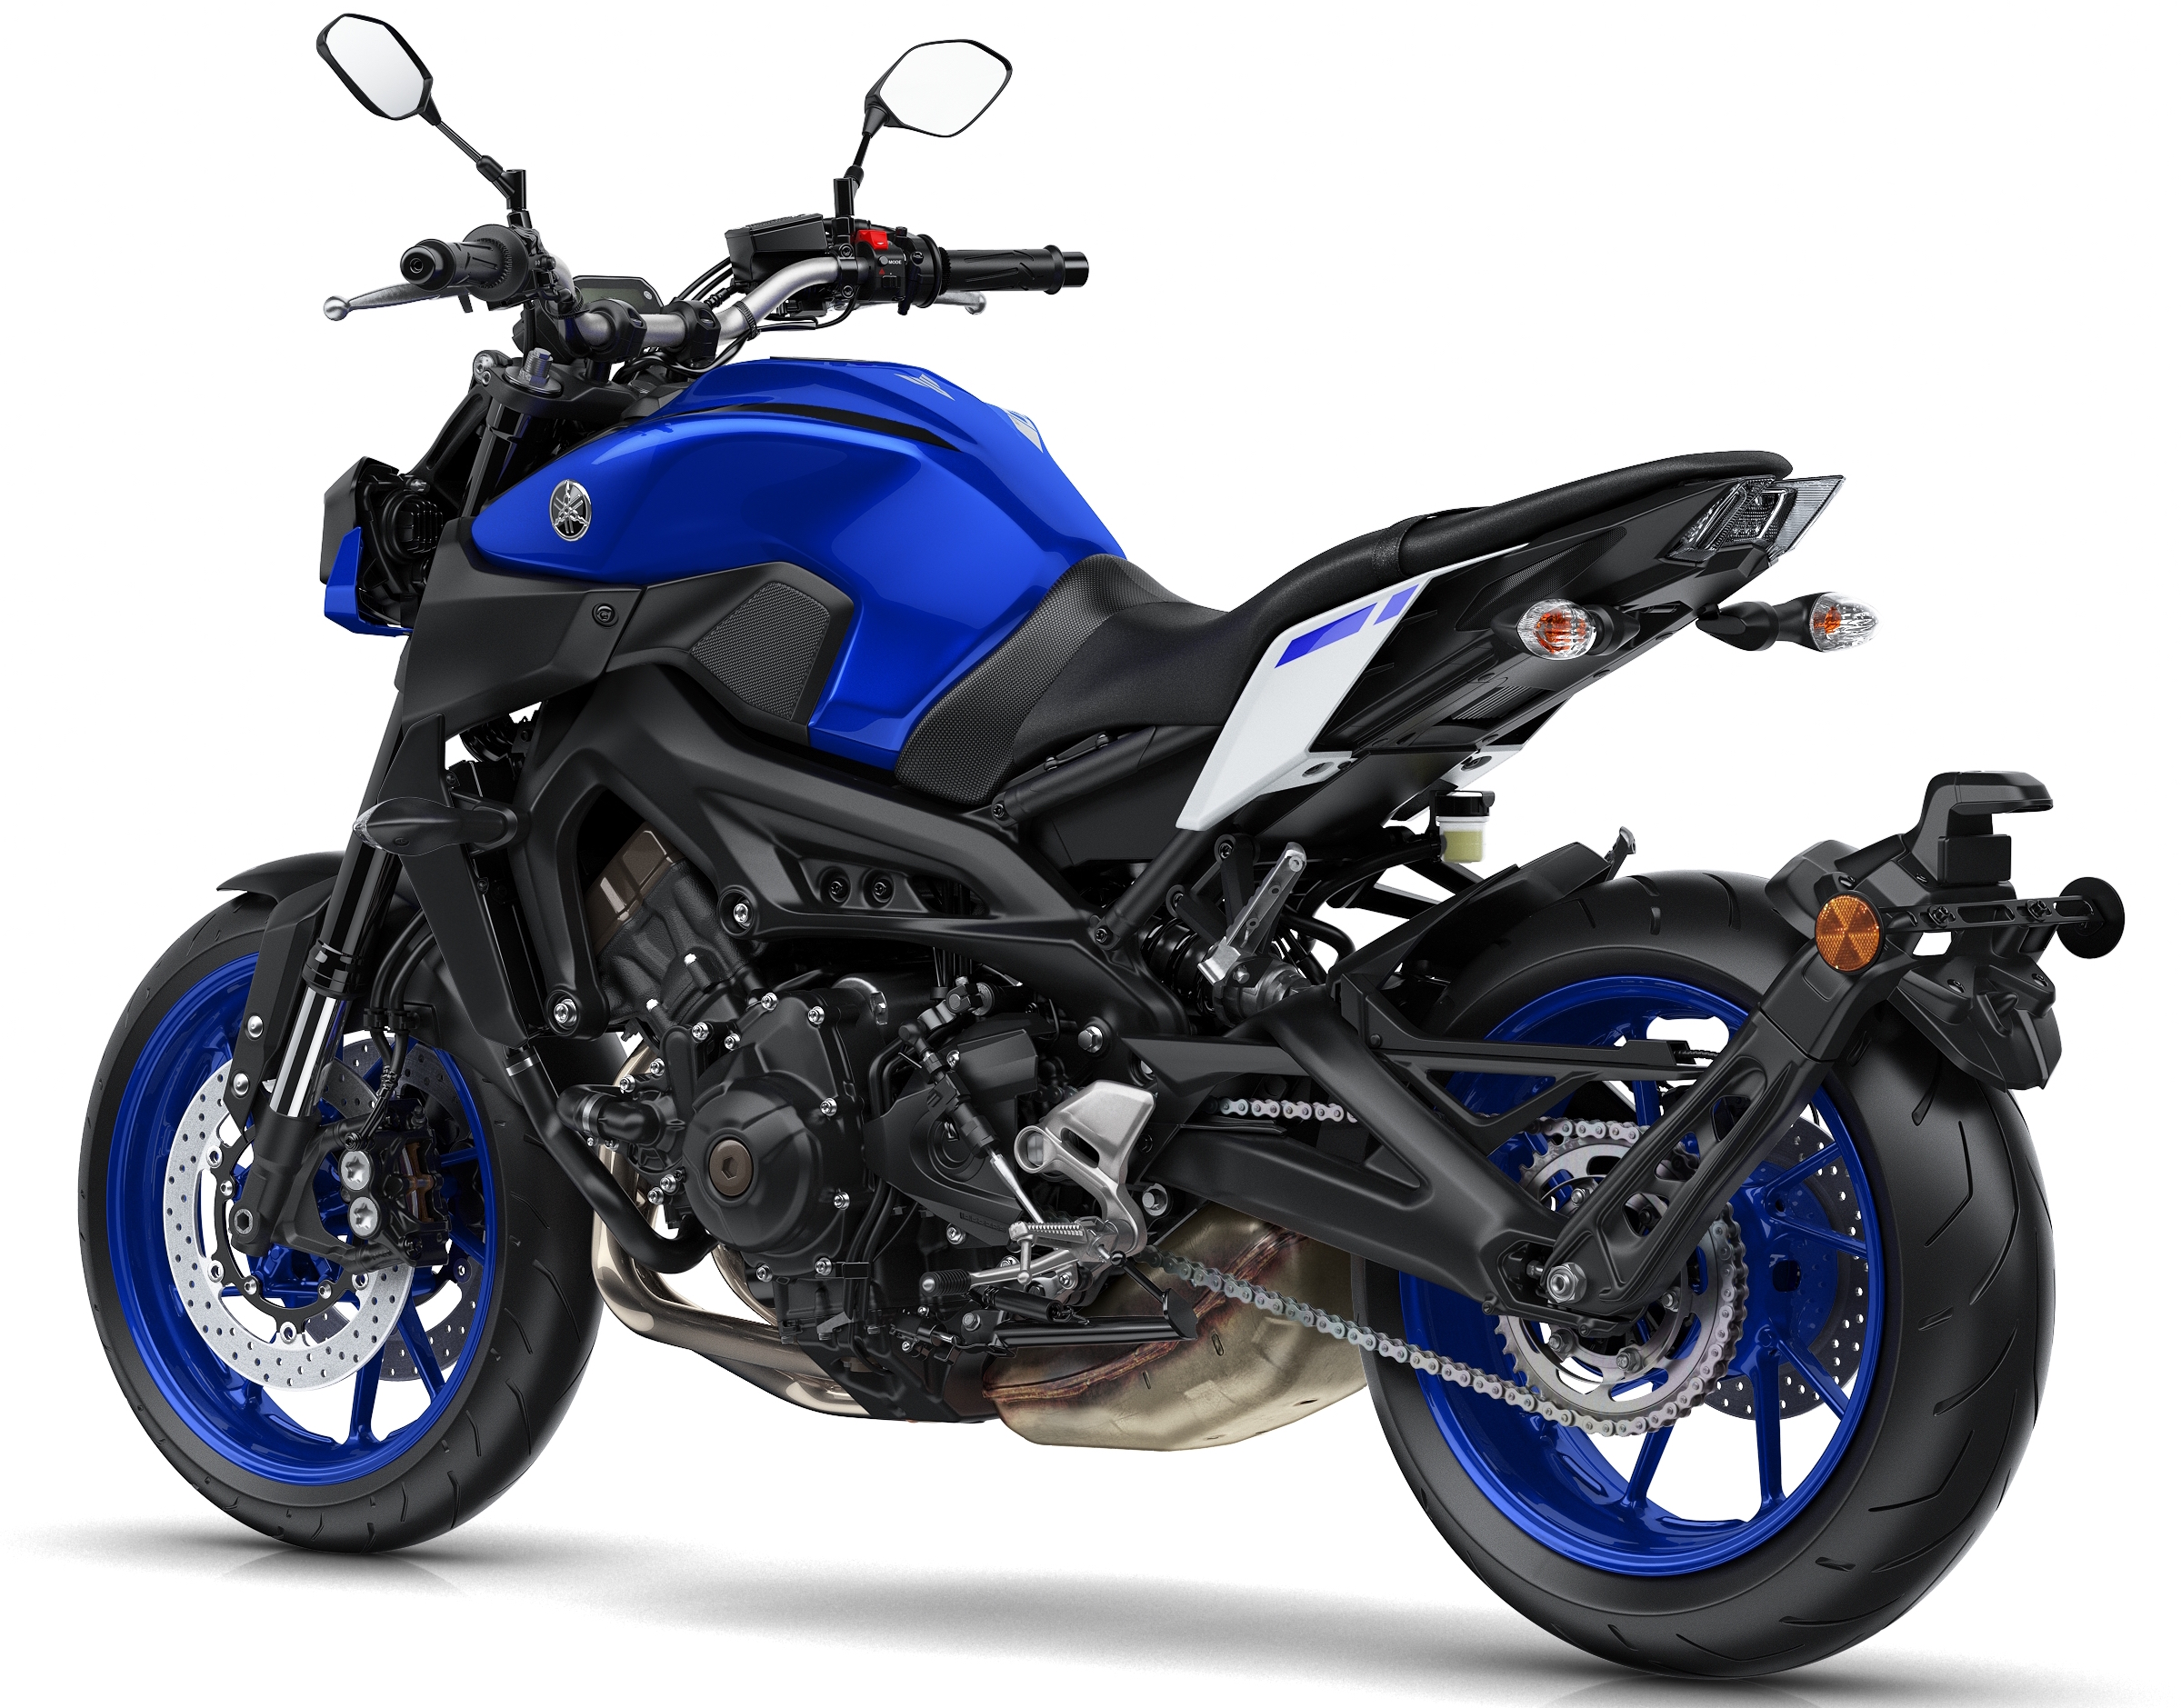 2017 Yamaha MT-09 updated for the new year - now with LED lights ...